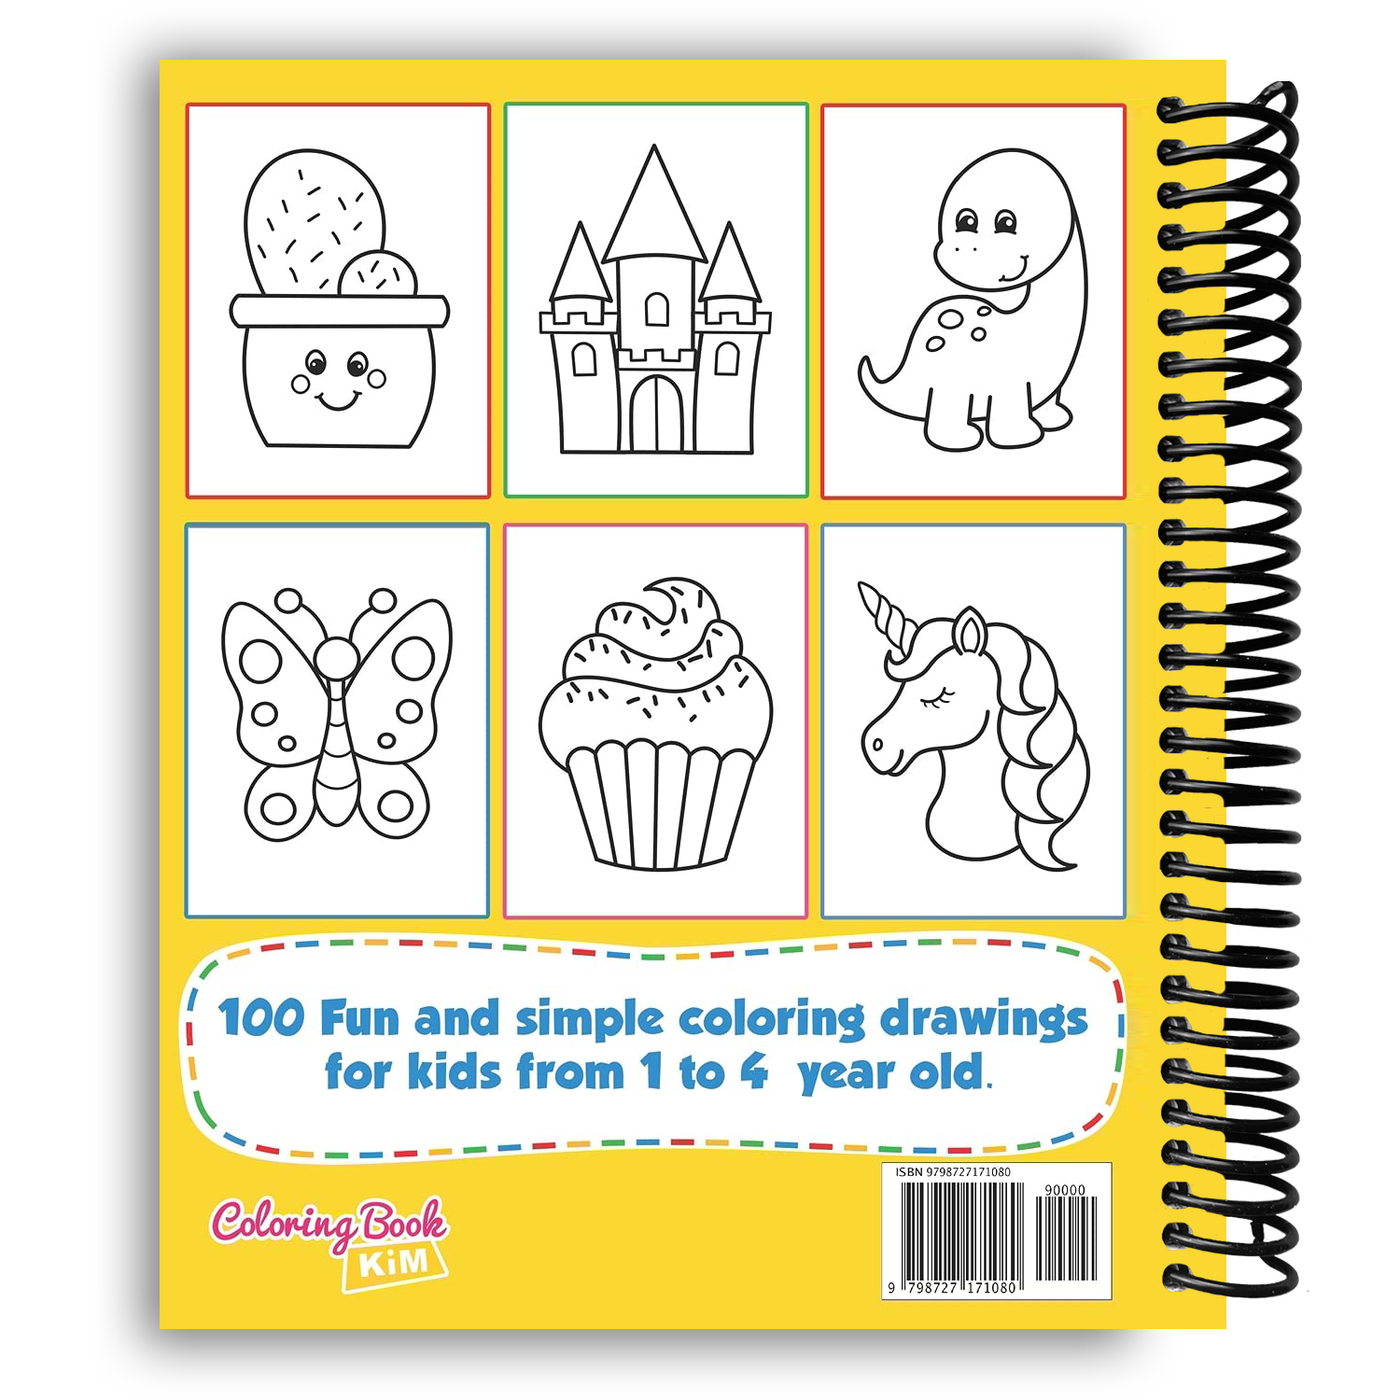 Simple & Big Coloring Book for Toddler: 100 Easy And Fun Coloring Pages For Kids, Preschool and Kindergarten (Spiral Bound)